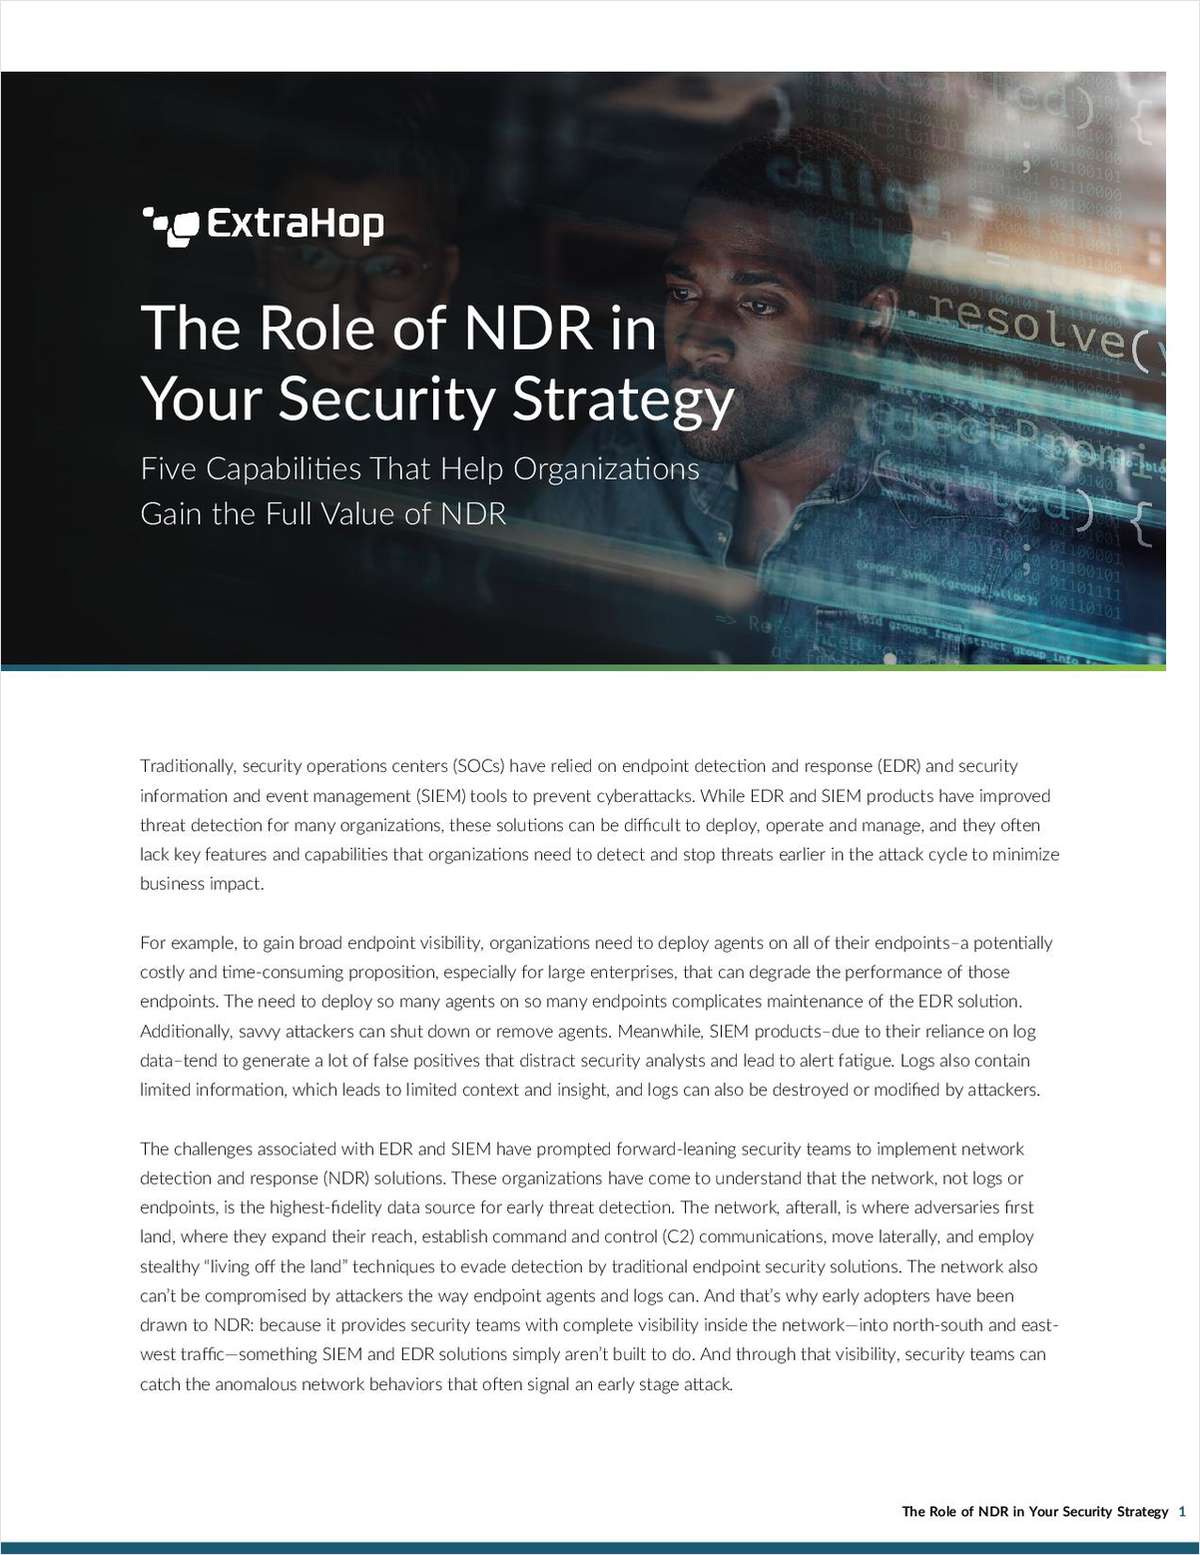 The Role of NDR in Your Security Strategy: 5 Capabilities That Help Organizations Gain the Full Value of NDR